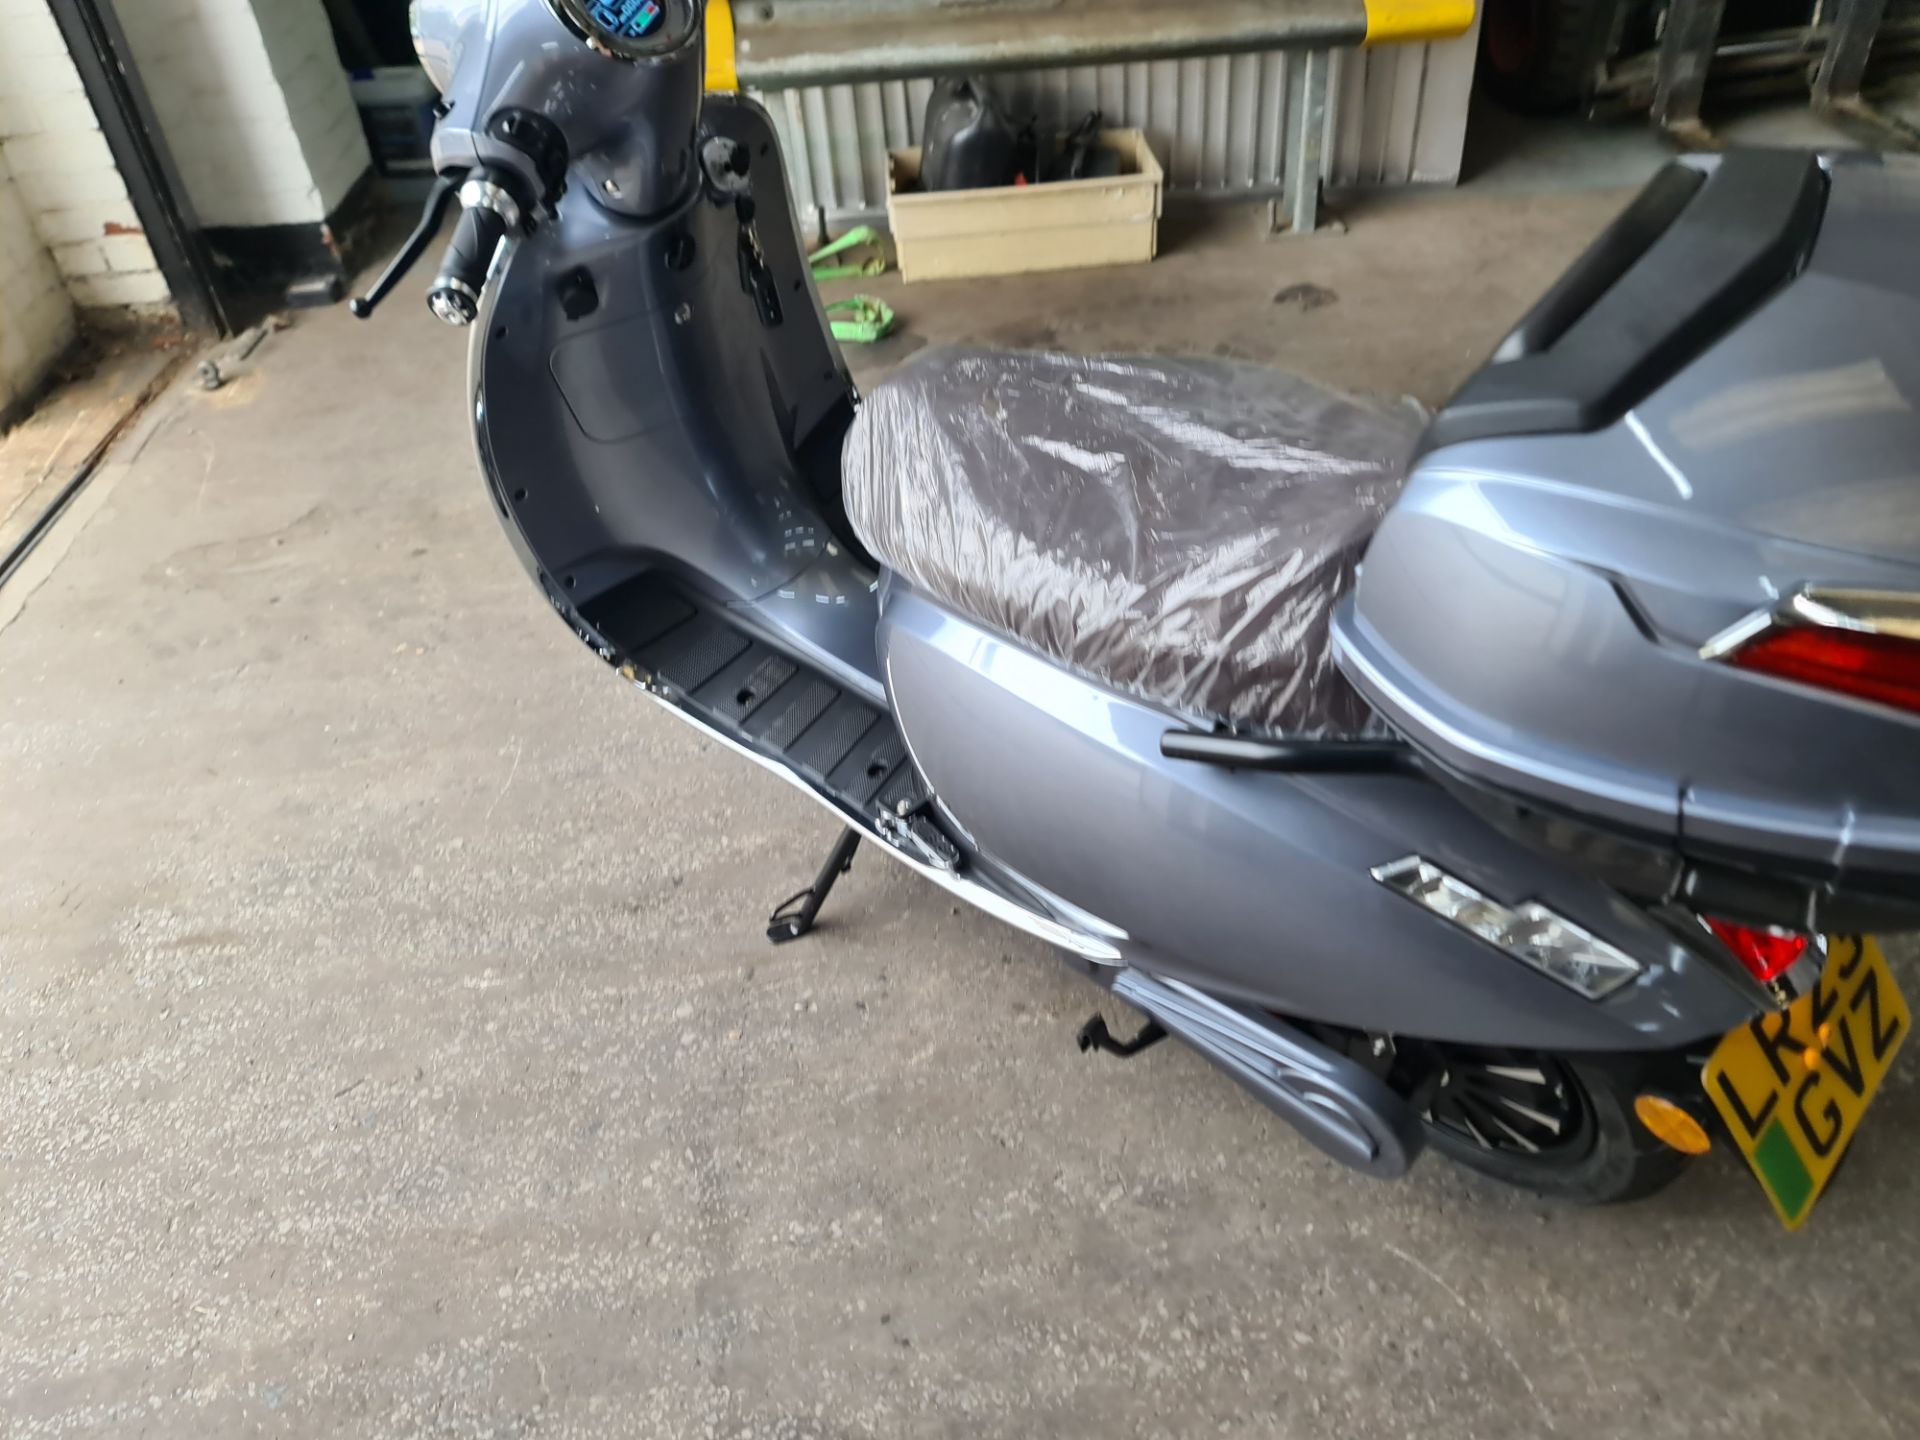 LR23 GVZ Ultra 4000 electric scooter, colour: grey, 125cc equivalent, 50mph top speed, 50 mile range - Image 19 of 28